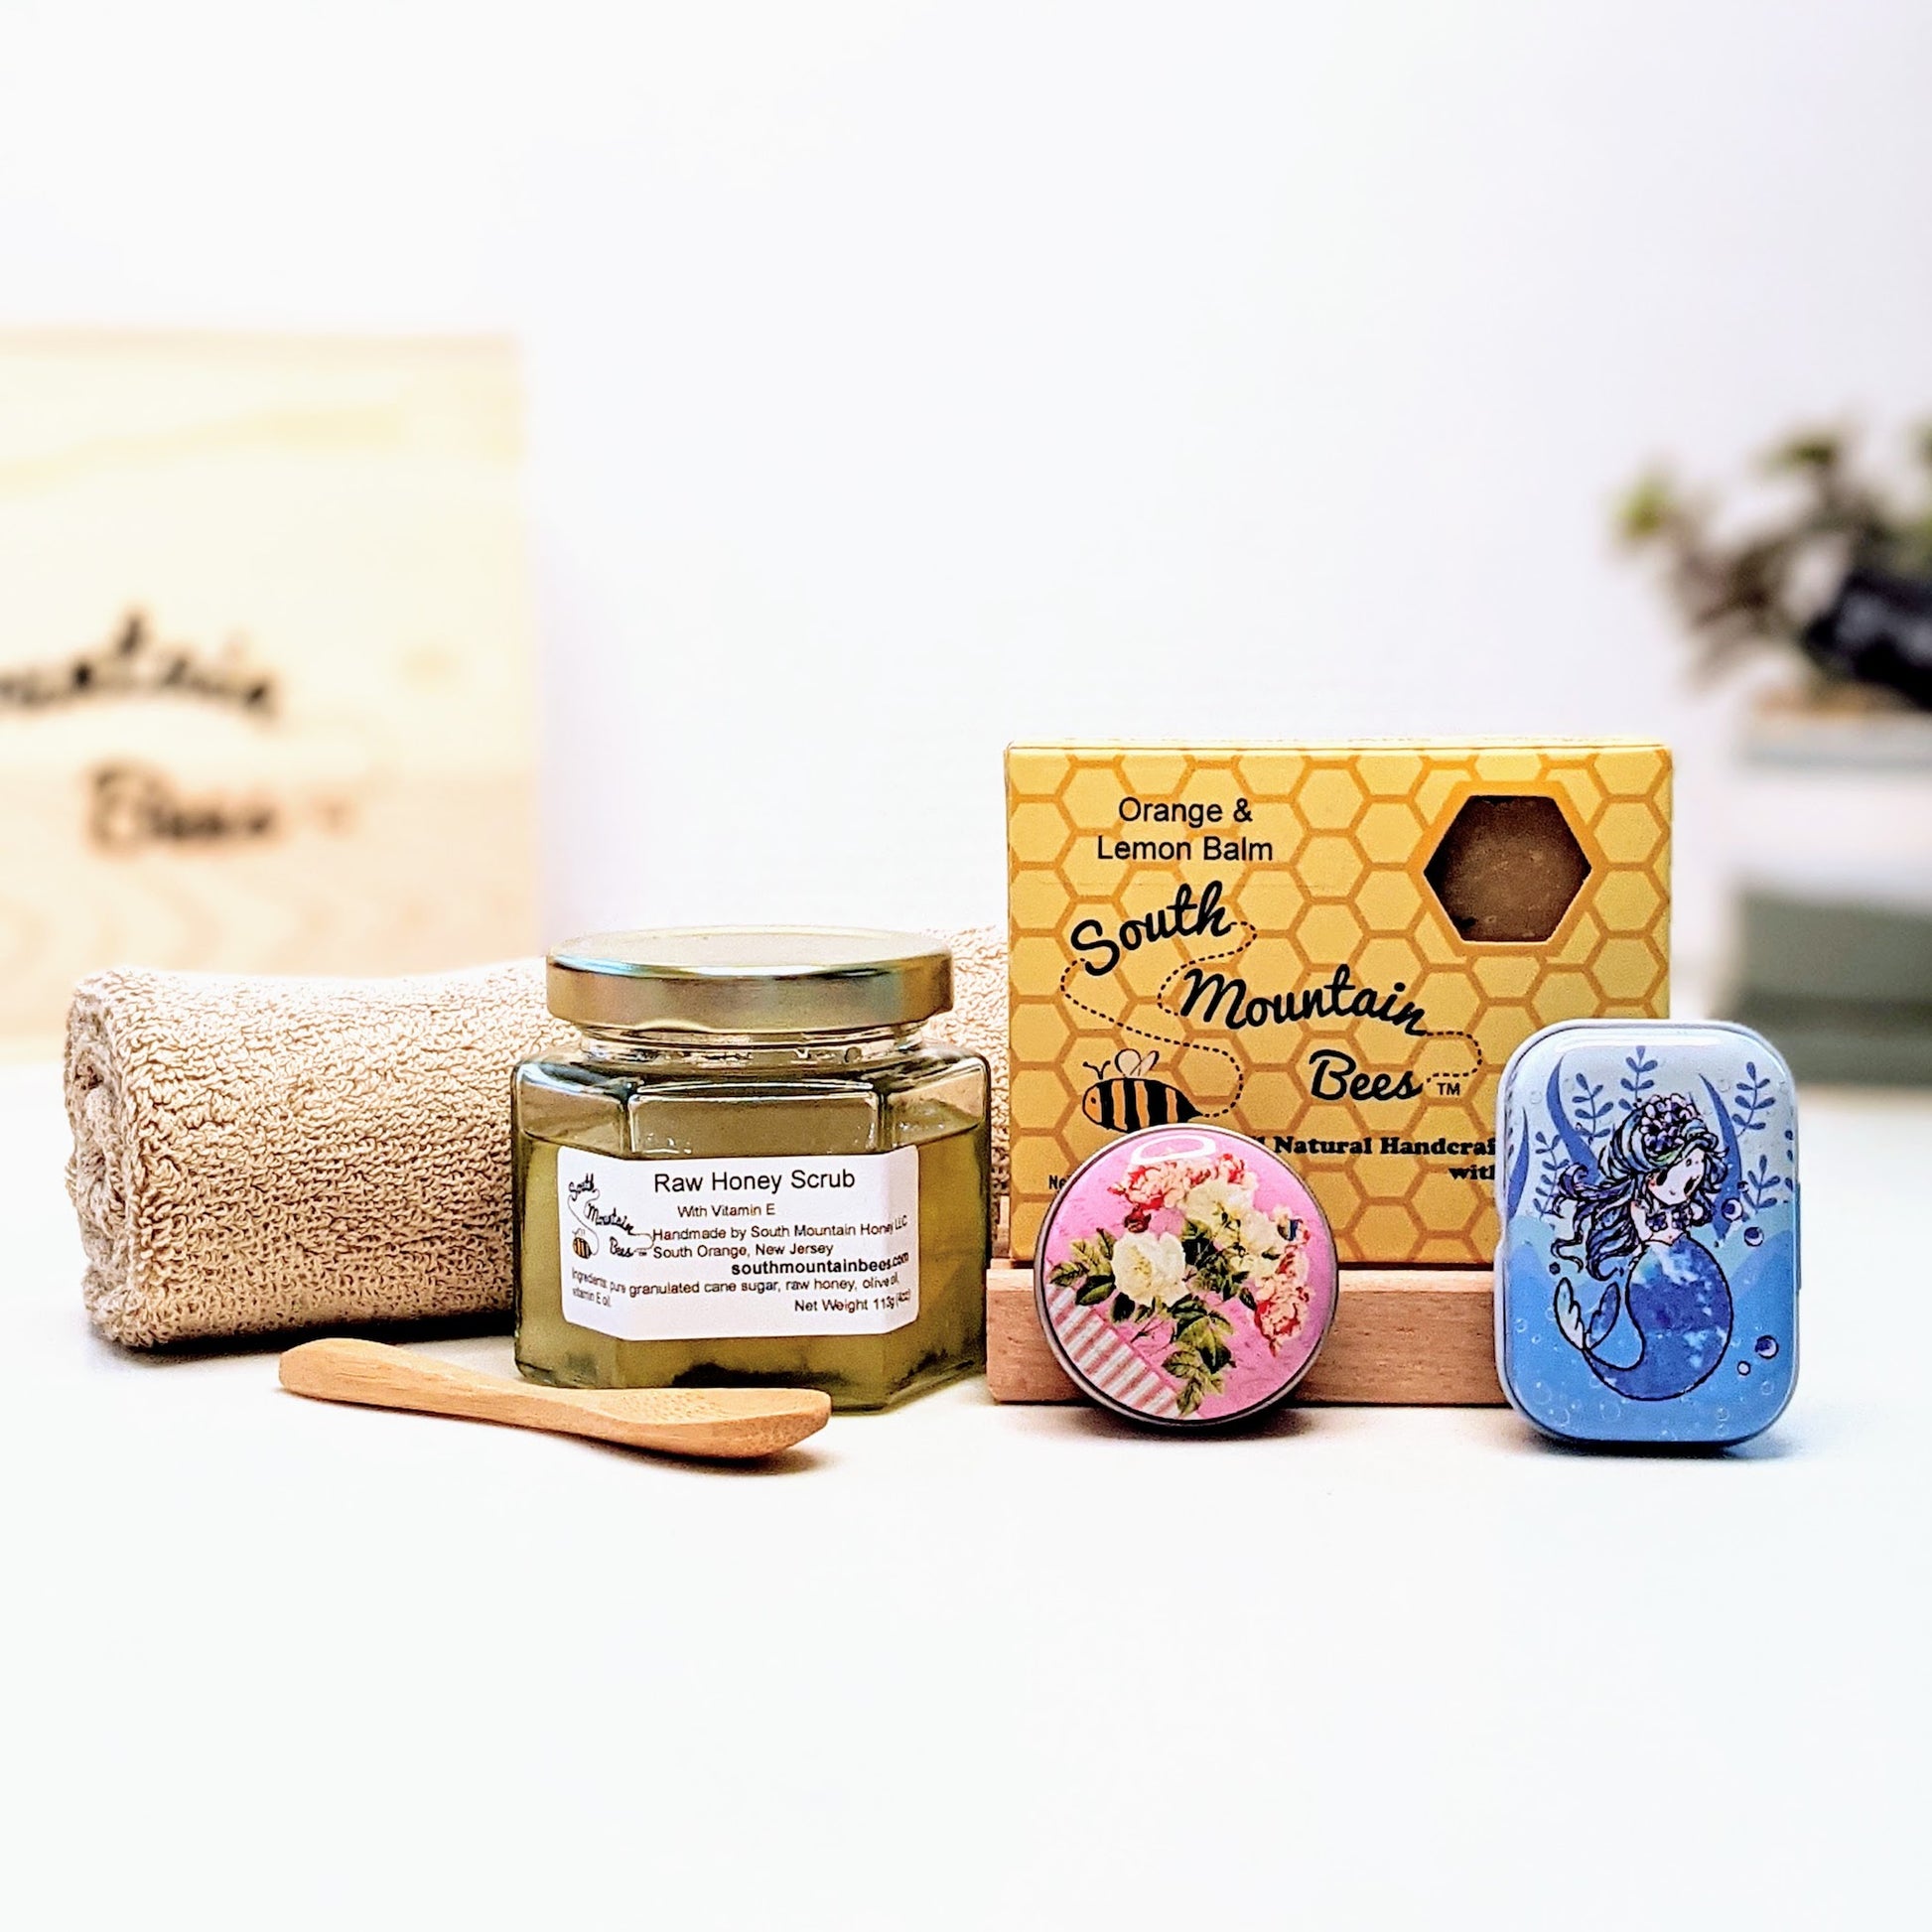 The Retreat Dream Box is filled with skin pampering products: a raw honey scrub with bamboo spoon, a soothing salve, two of our best selling products: a honey soap and a lip balm, a beech soap dish, and a hotel quality 100% cotton washcloth.